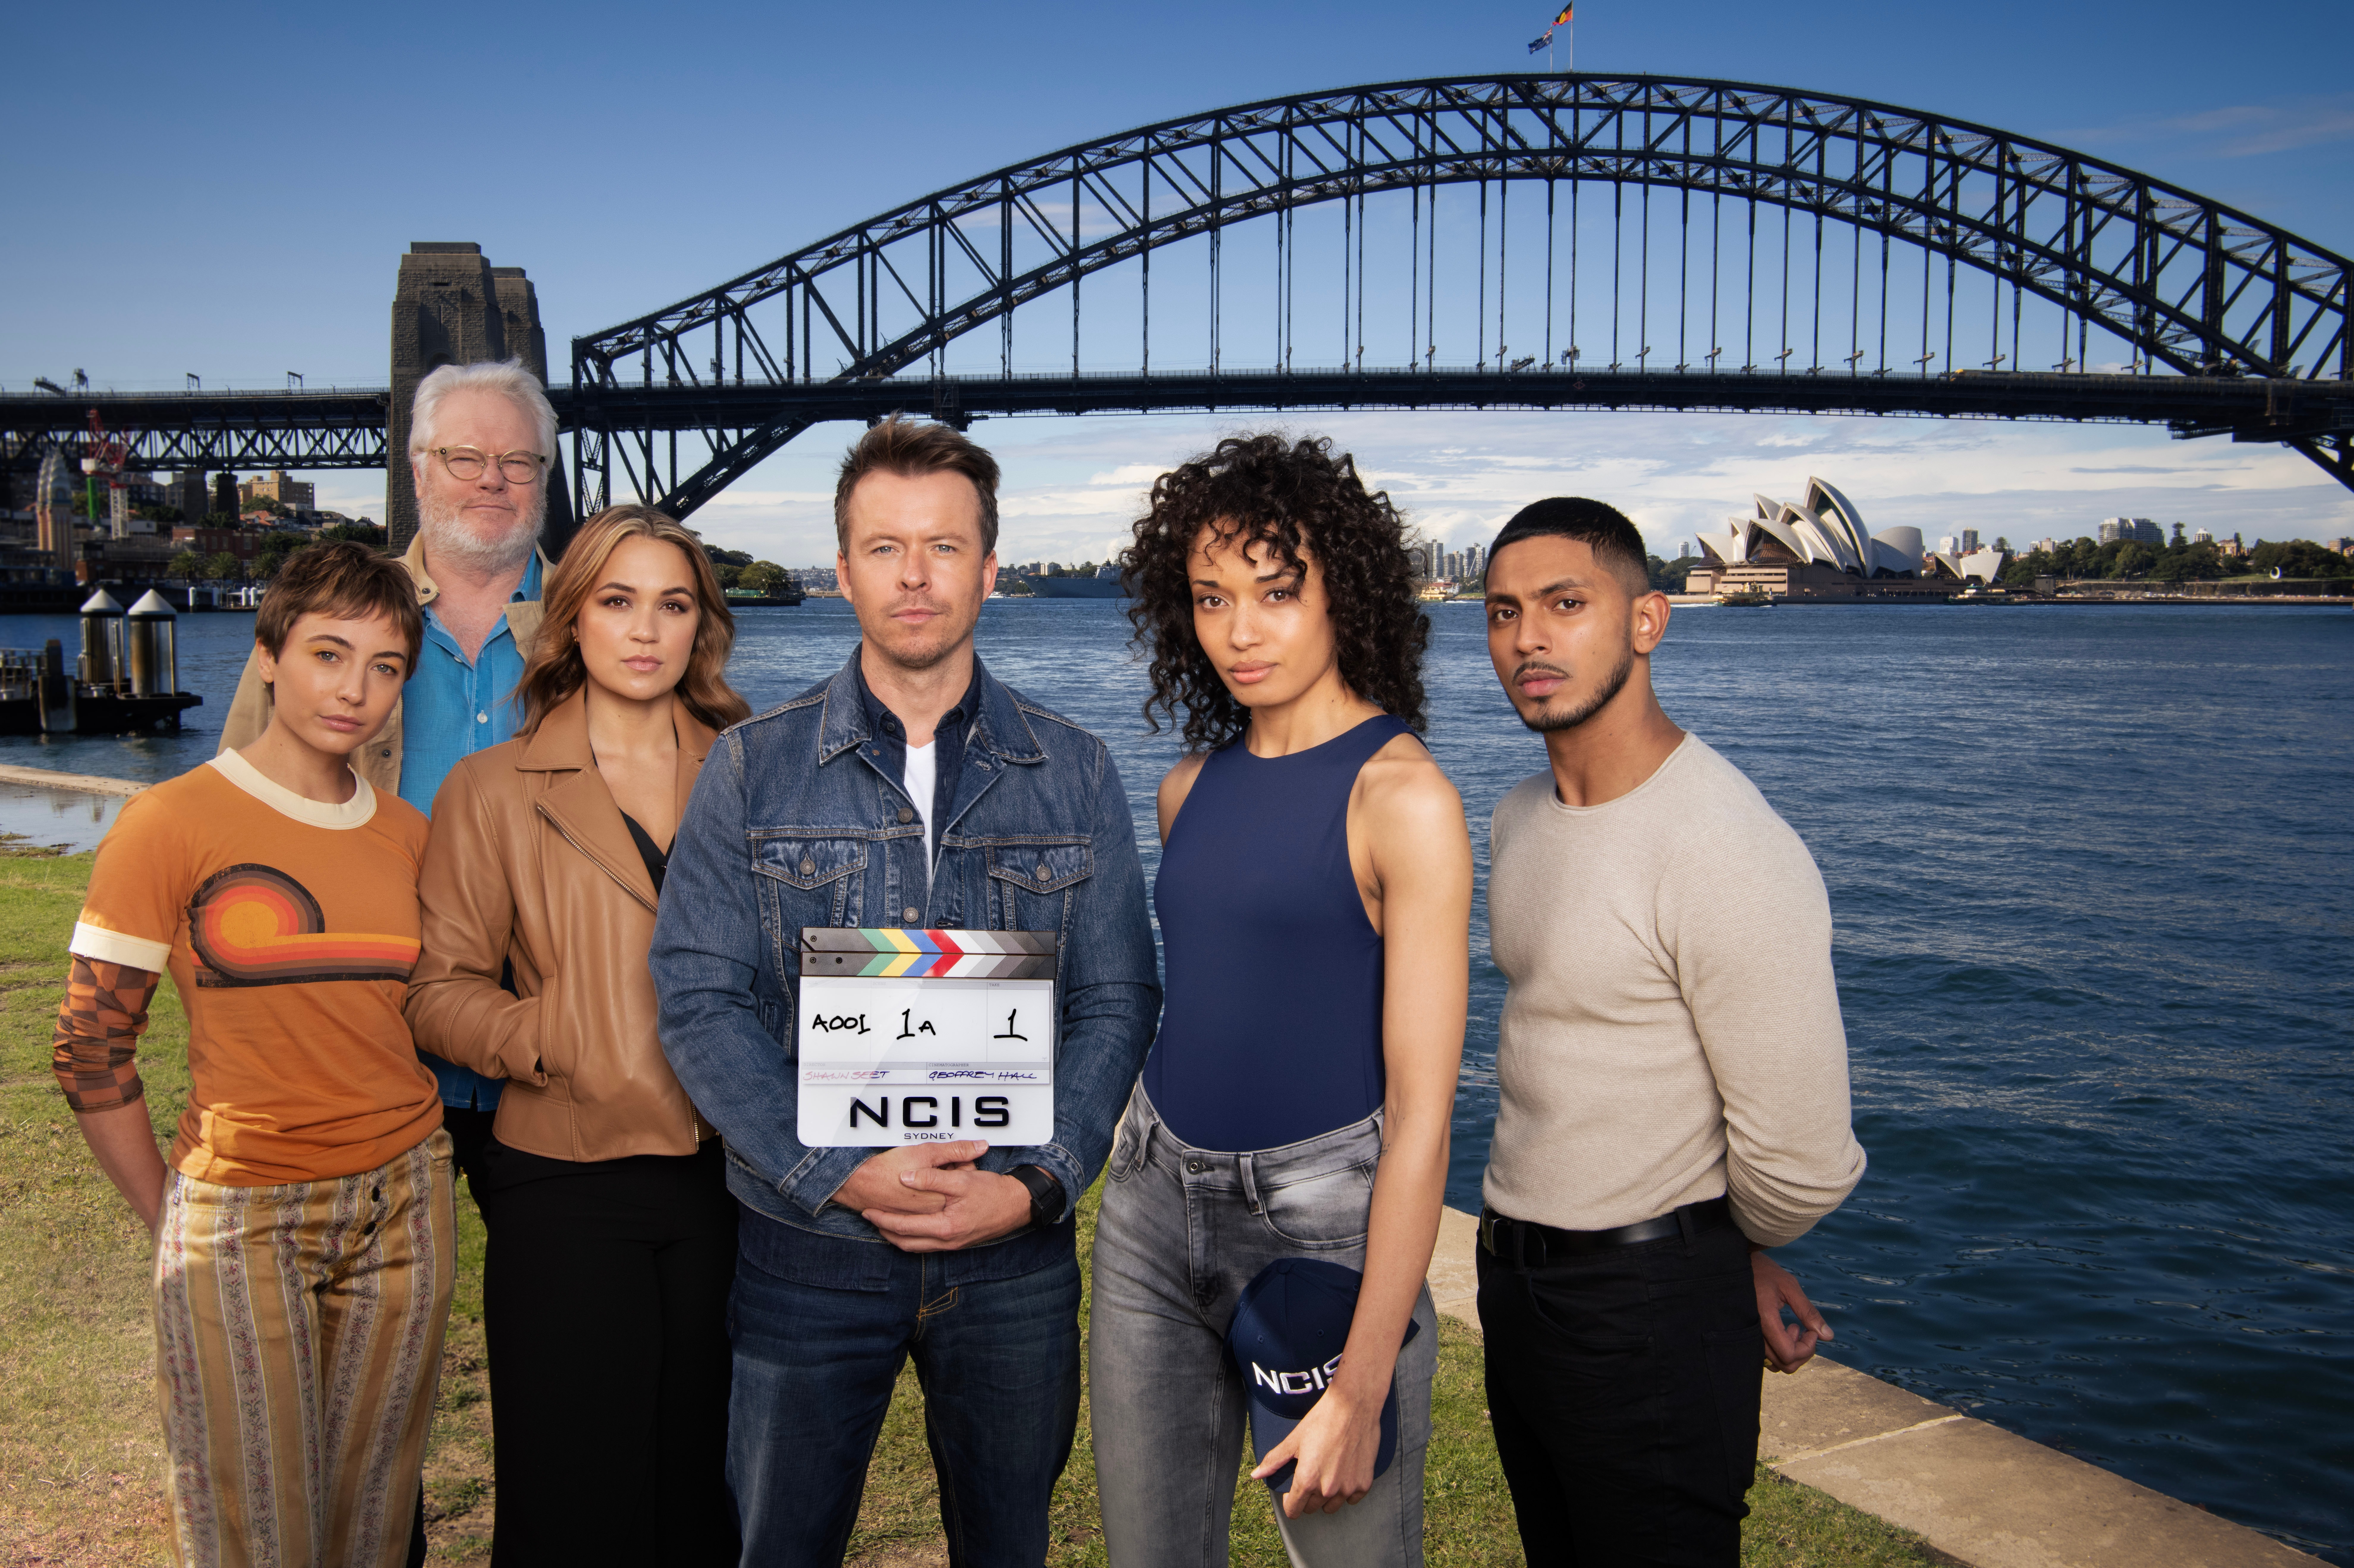 The NCIS:Sydney cast from left to right: Mavournee Hazel as Forensic Pathologist “Bluebird 'Blue' Gleeson, William McInnes as Forensic Pathologist Dr. Roy Penrose, Tuuli Narkle as AFP Liaison Officer Constable Evie Cooper, Todd Lasance as AFP Liaison Officer Sergeant Jim  'JD' Dempsey, Olivia Swann as NCIS Special Agent Captain Michelle Mackey and Sean Sagar as Special Agent DeShawn Jackson. PHOTO CREDIT: Daniel Asher Smith/Paramount+    © TM & © 2023 CBS Studios Inc. NCIS: Sydney and related marks and logos are trademarks of CBS Studios Inc. All Rights Reserved.